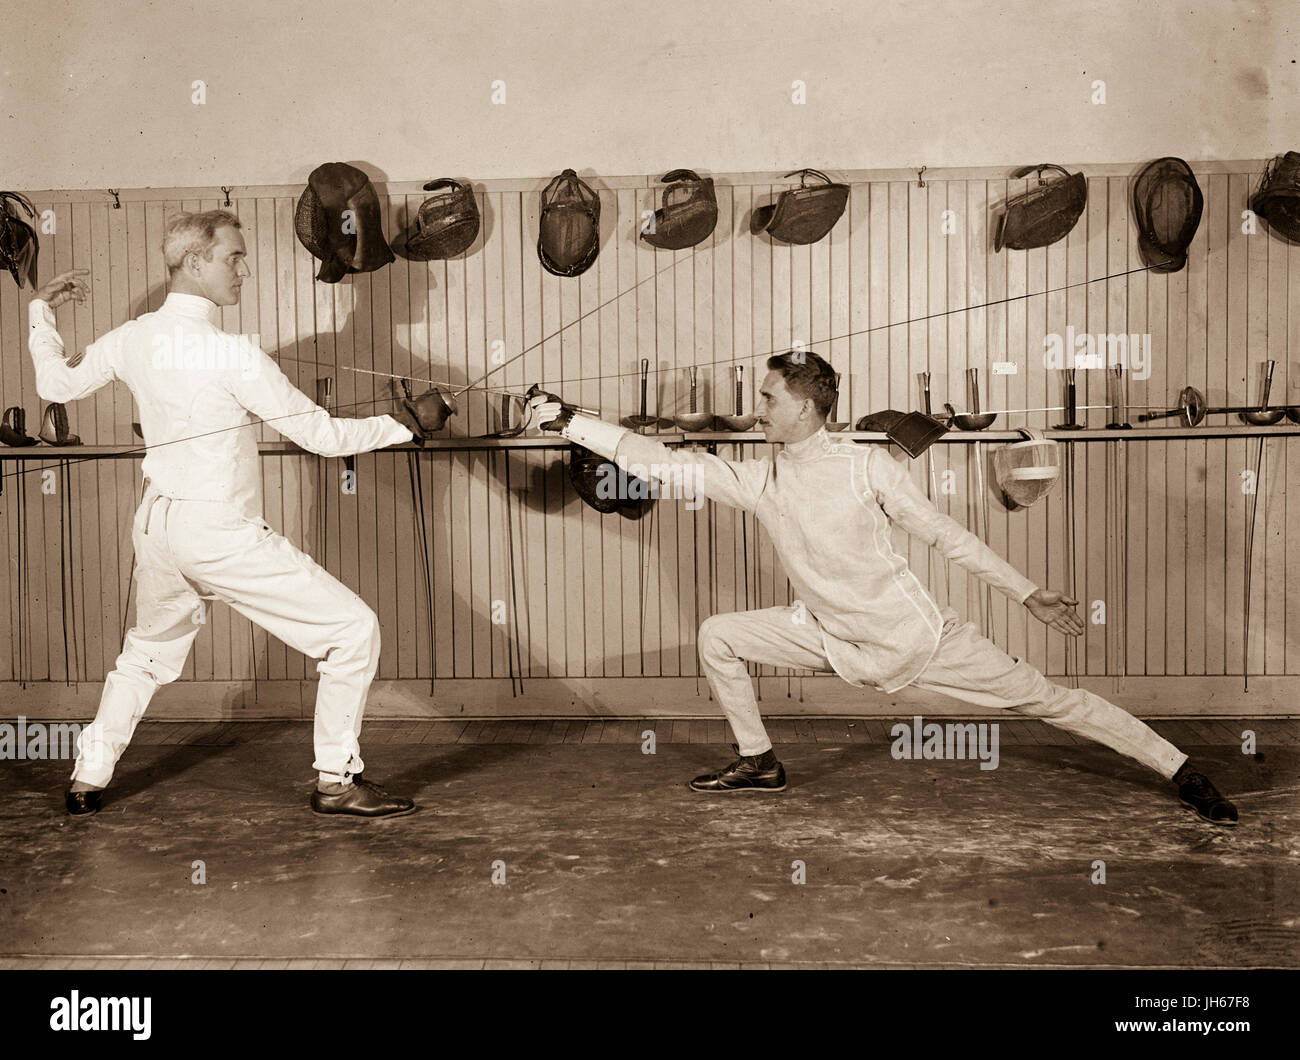 Competitive sport fencers Henry Breckenridge and Hassanieu Bey, 3/24/24 Stock Photo